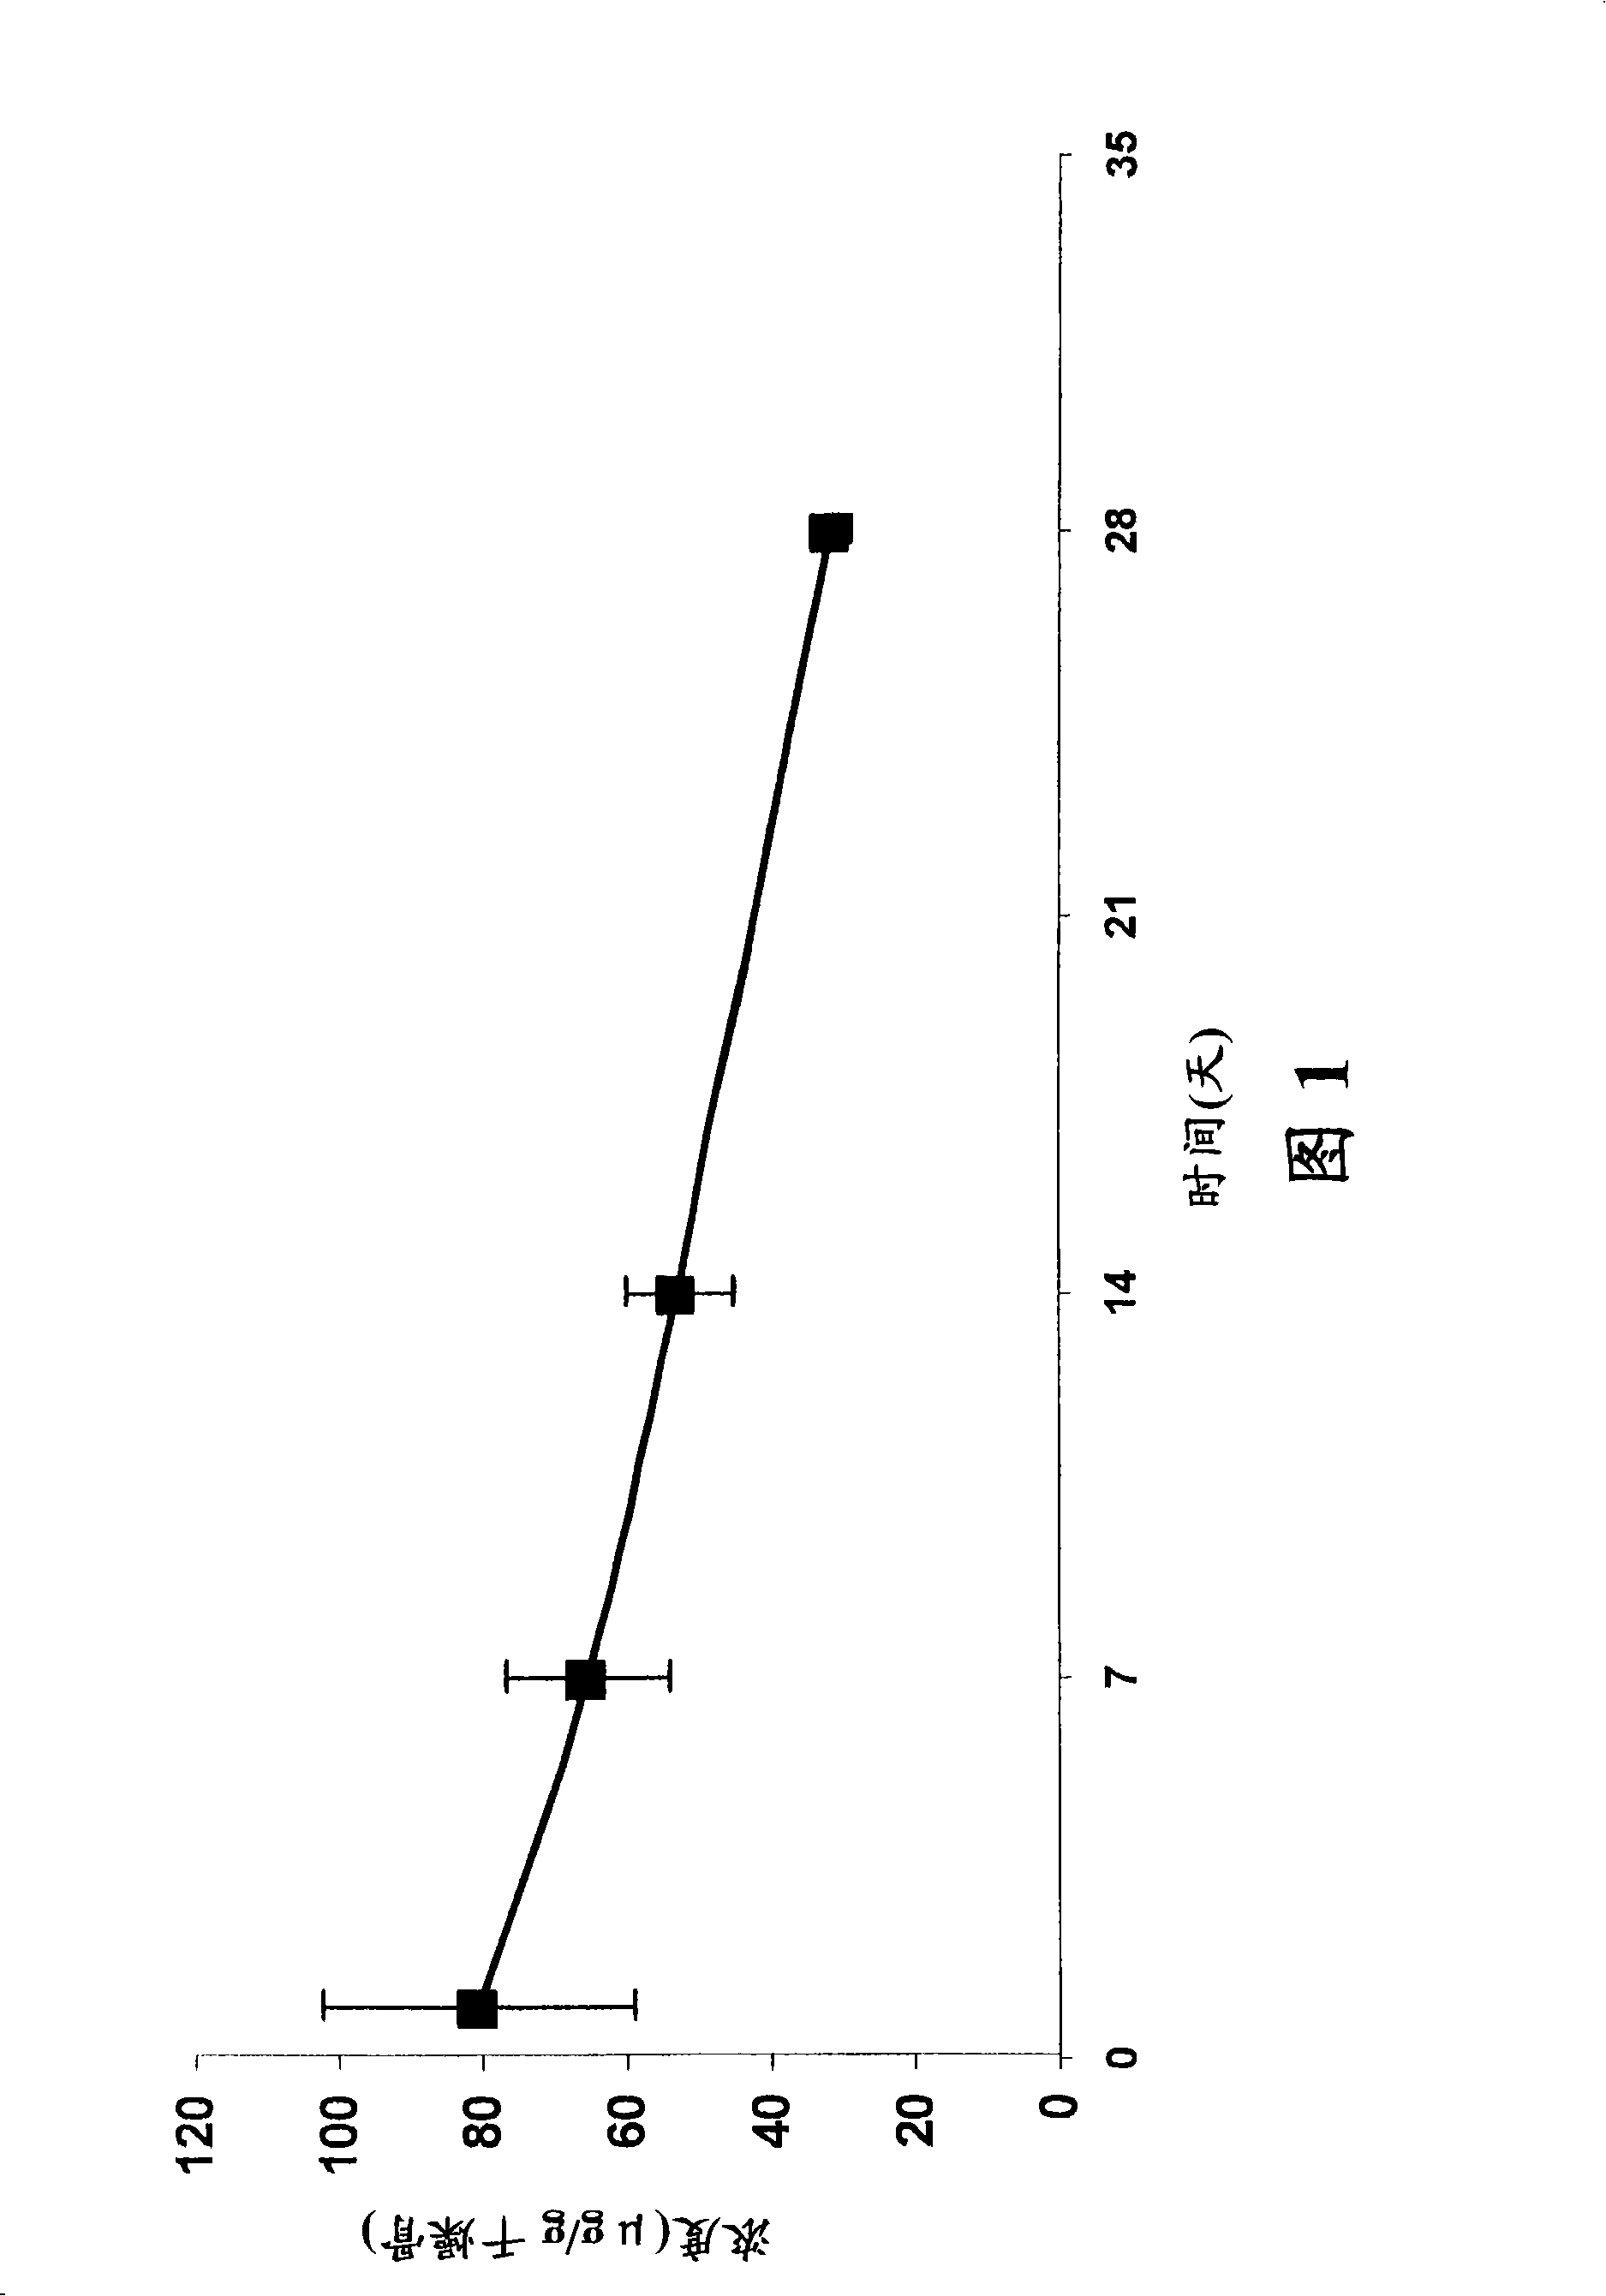 Phosphonated fluoroquinolones, antibacterial analogs thereof, and methods for the prevention and treatment of bone and joint infections